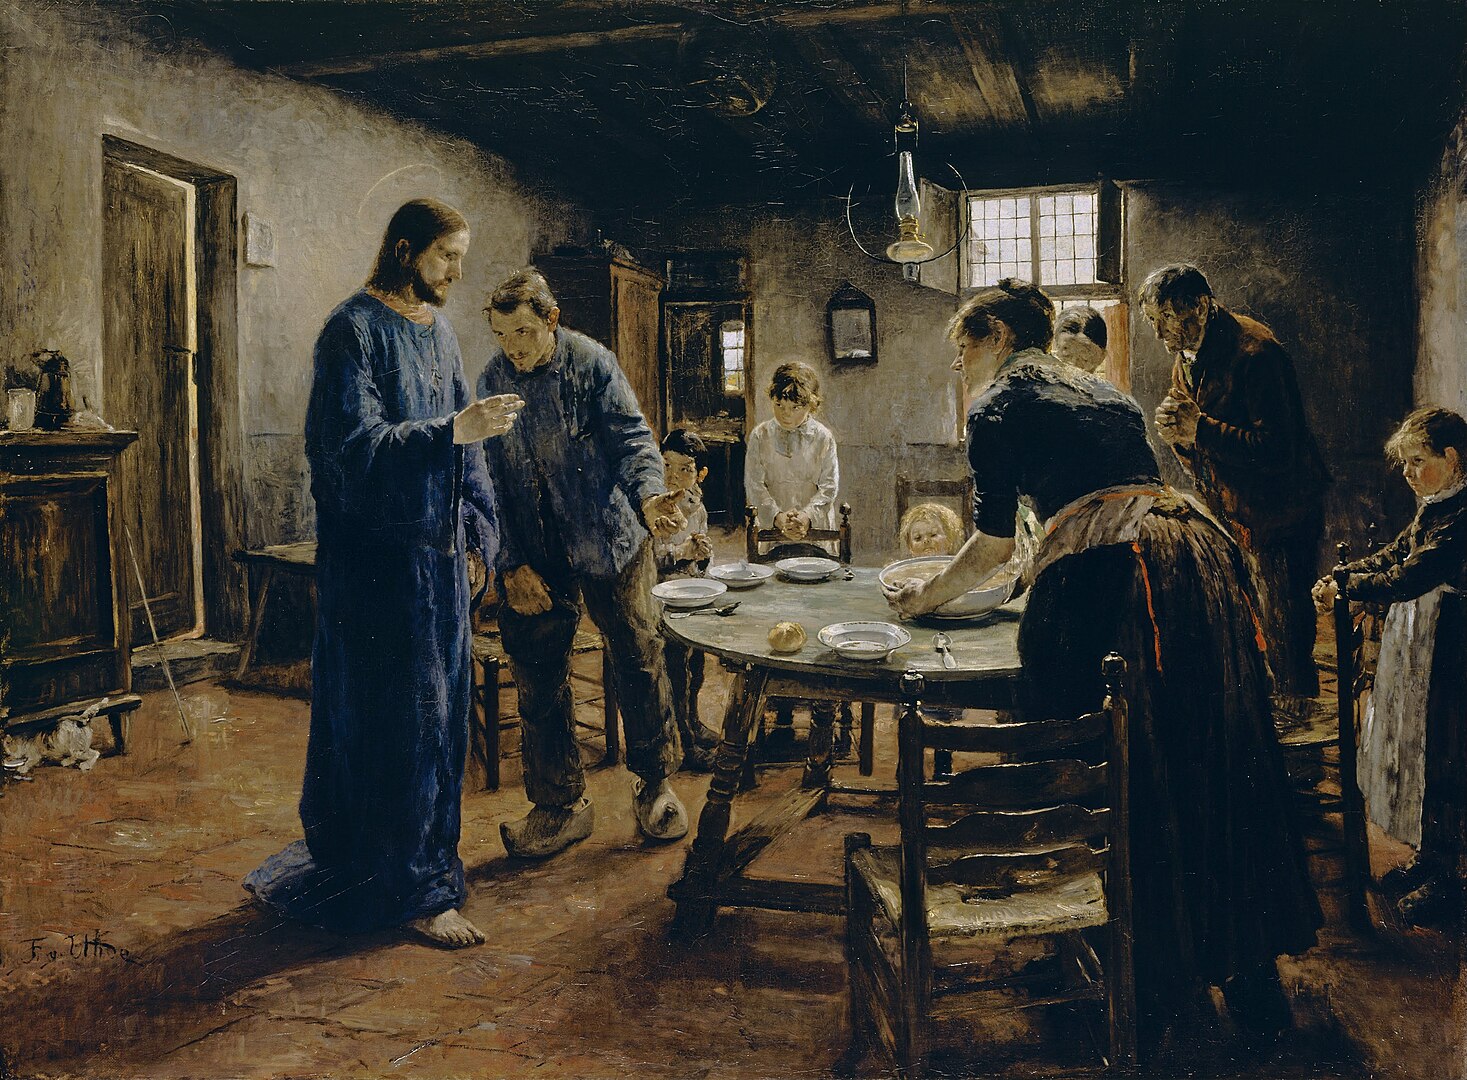 Grace before the Meal, by Fritz von Uhde, 1885